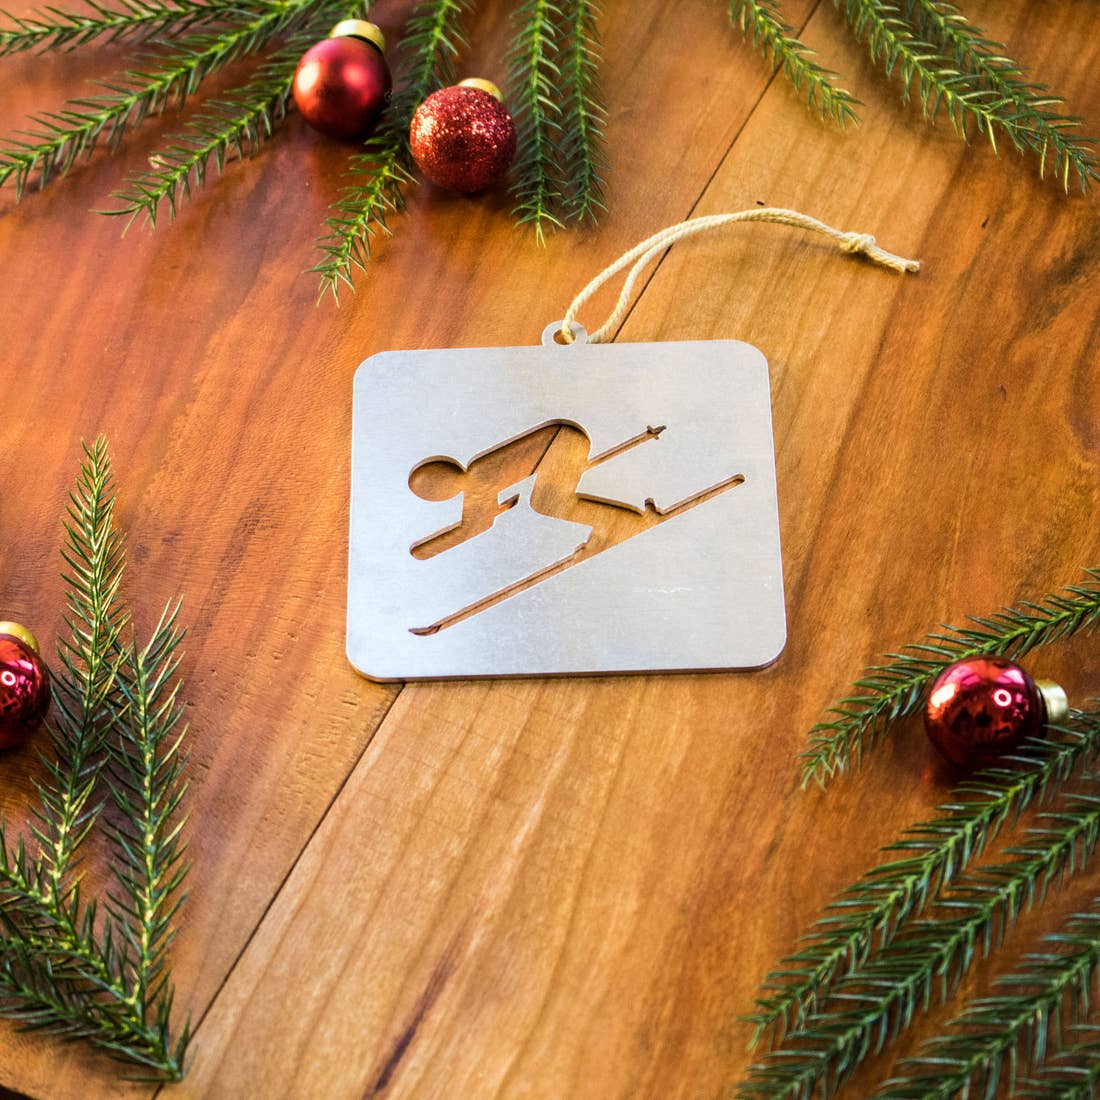 Square Aluminum Ornament with a Downhill Skier laser cut into it